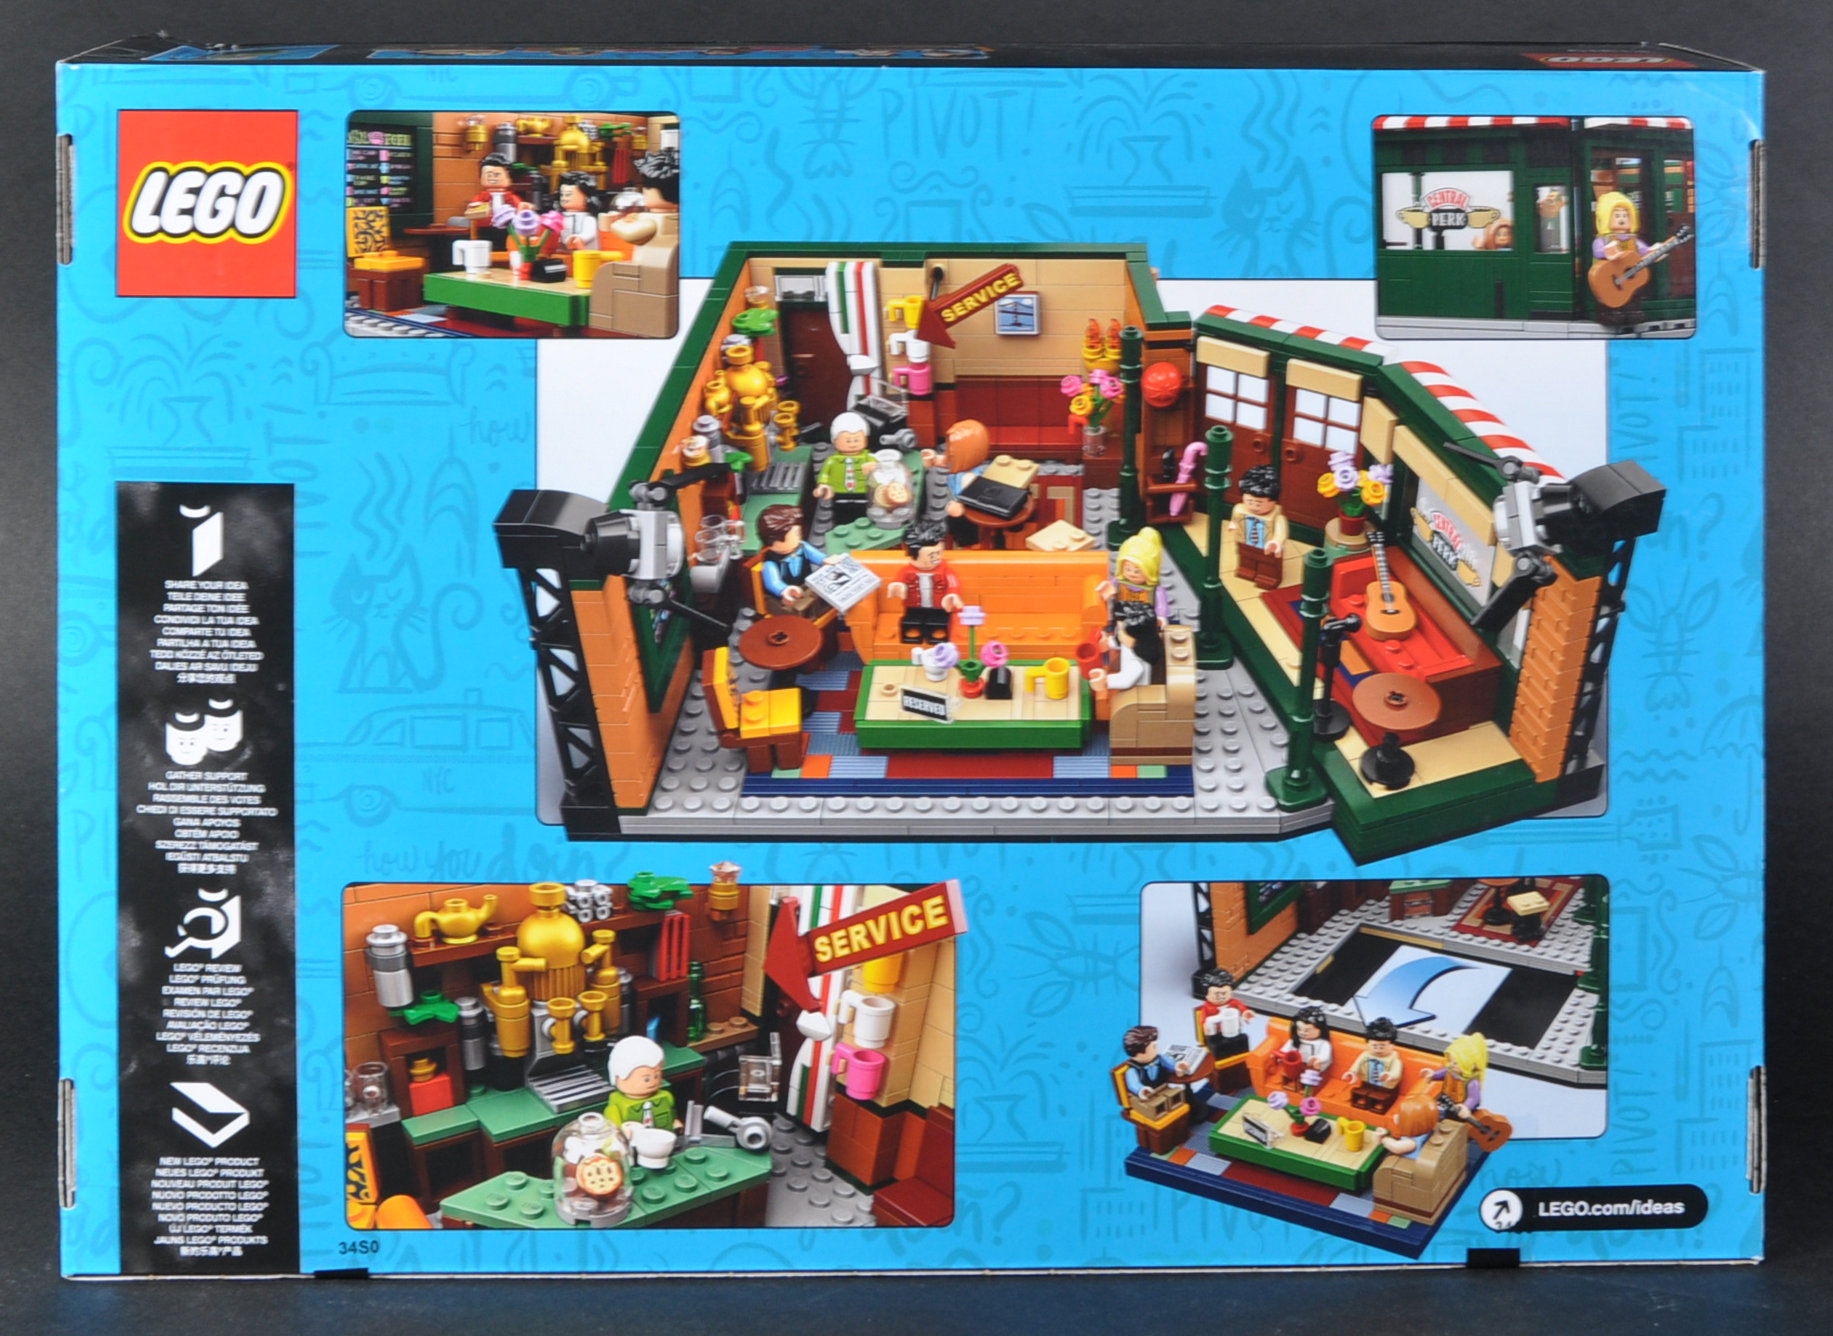 LEGO SET - FRIENDS - 21319 - CENTRAL PERK - Image 3 of 3